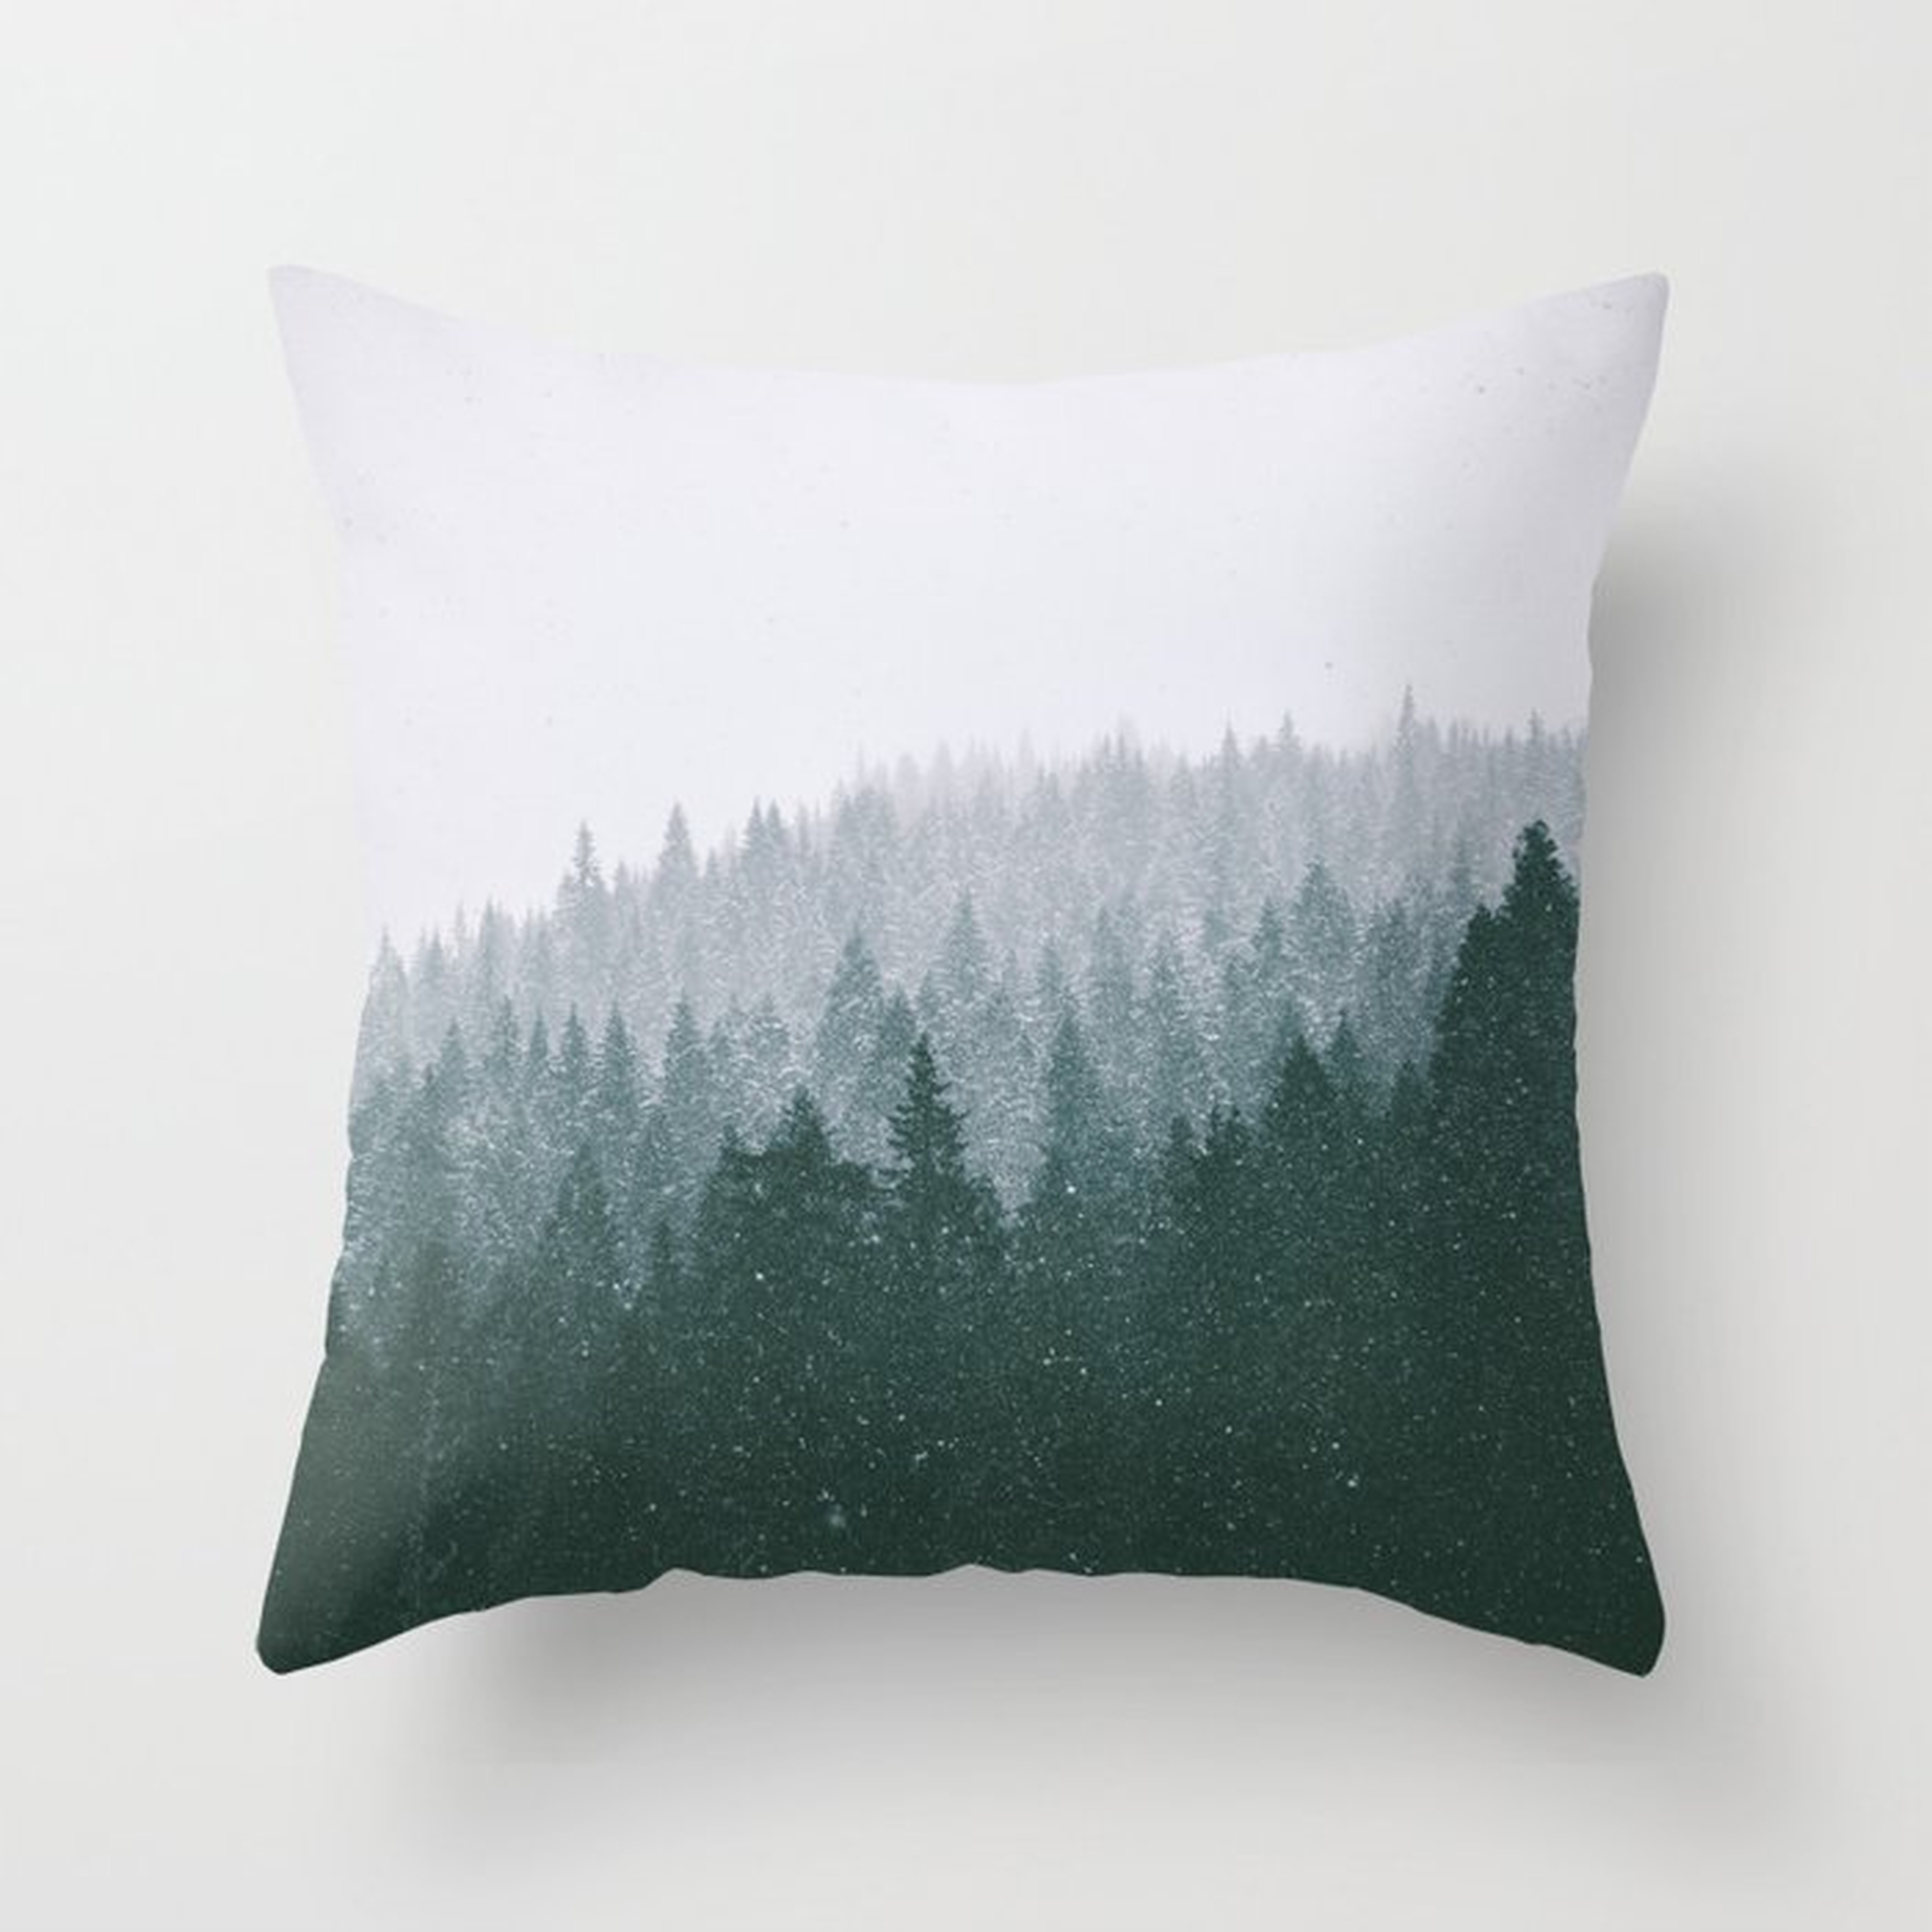 Winter Vii Throw Pillow by Hannah Kemp - Cover (16" x 16") With Pillow Insert - Outdoor Pillow - Society6